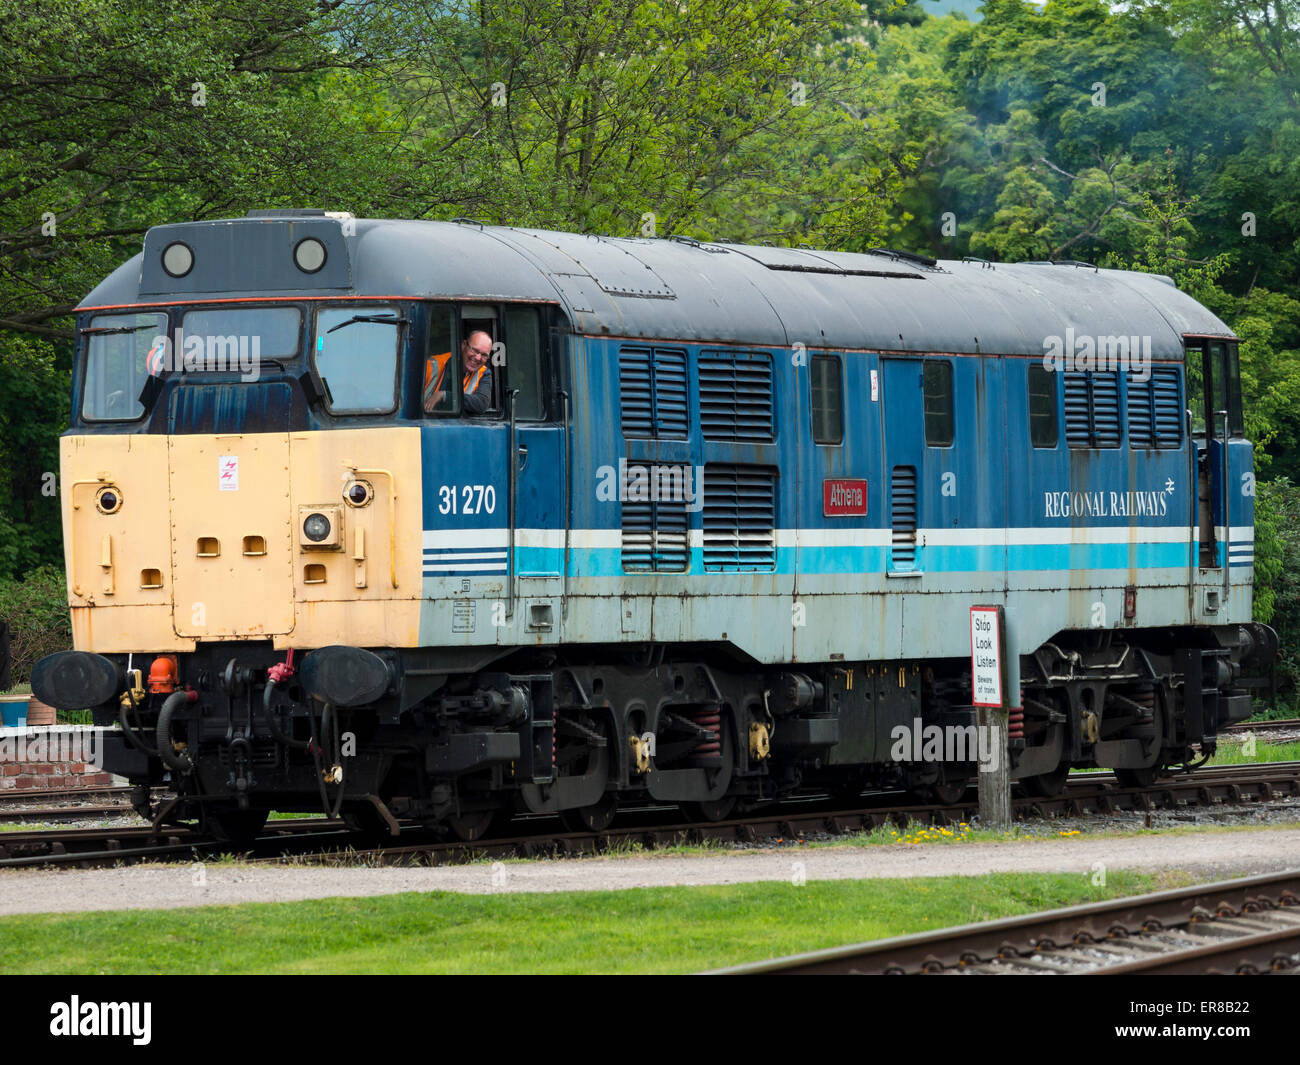 Rowsley,near Matlock,Derbyshire,Britain. May 27th 2015.The vintage diesel locomotive Athena is prepared for service at Peak Rail Stock Photo